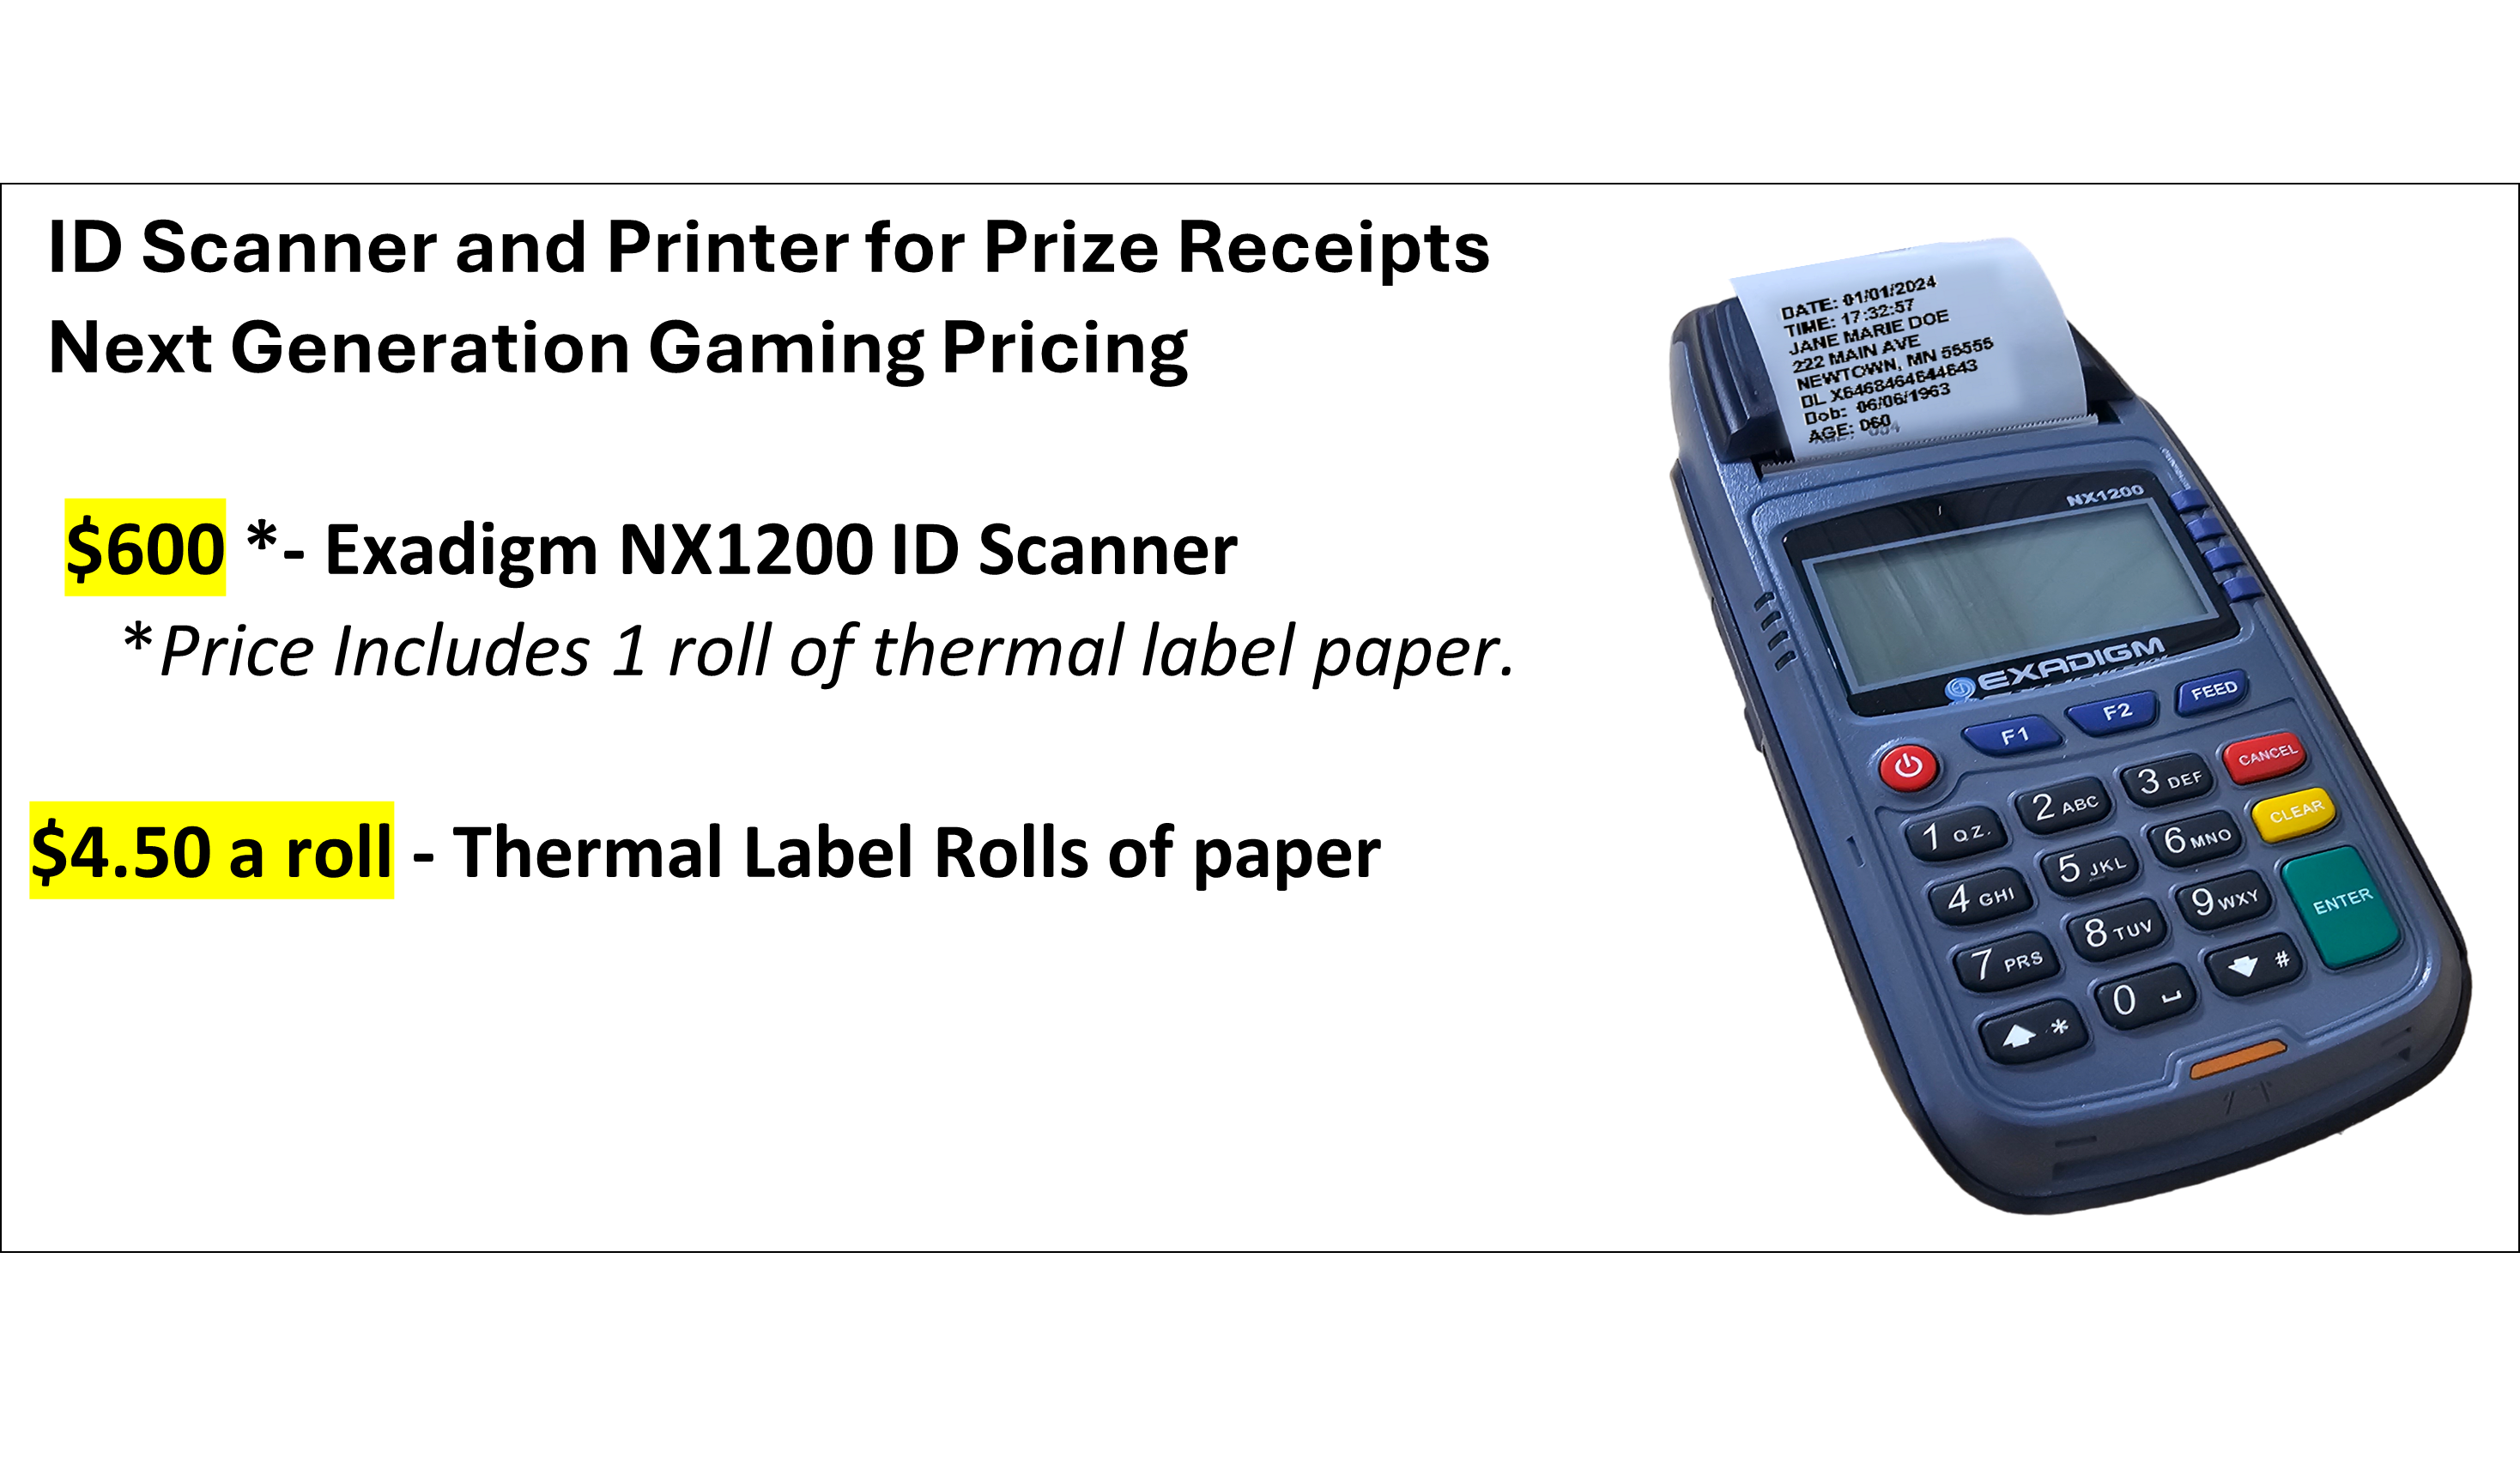 ID Scanner/Printer for Prize Receipts